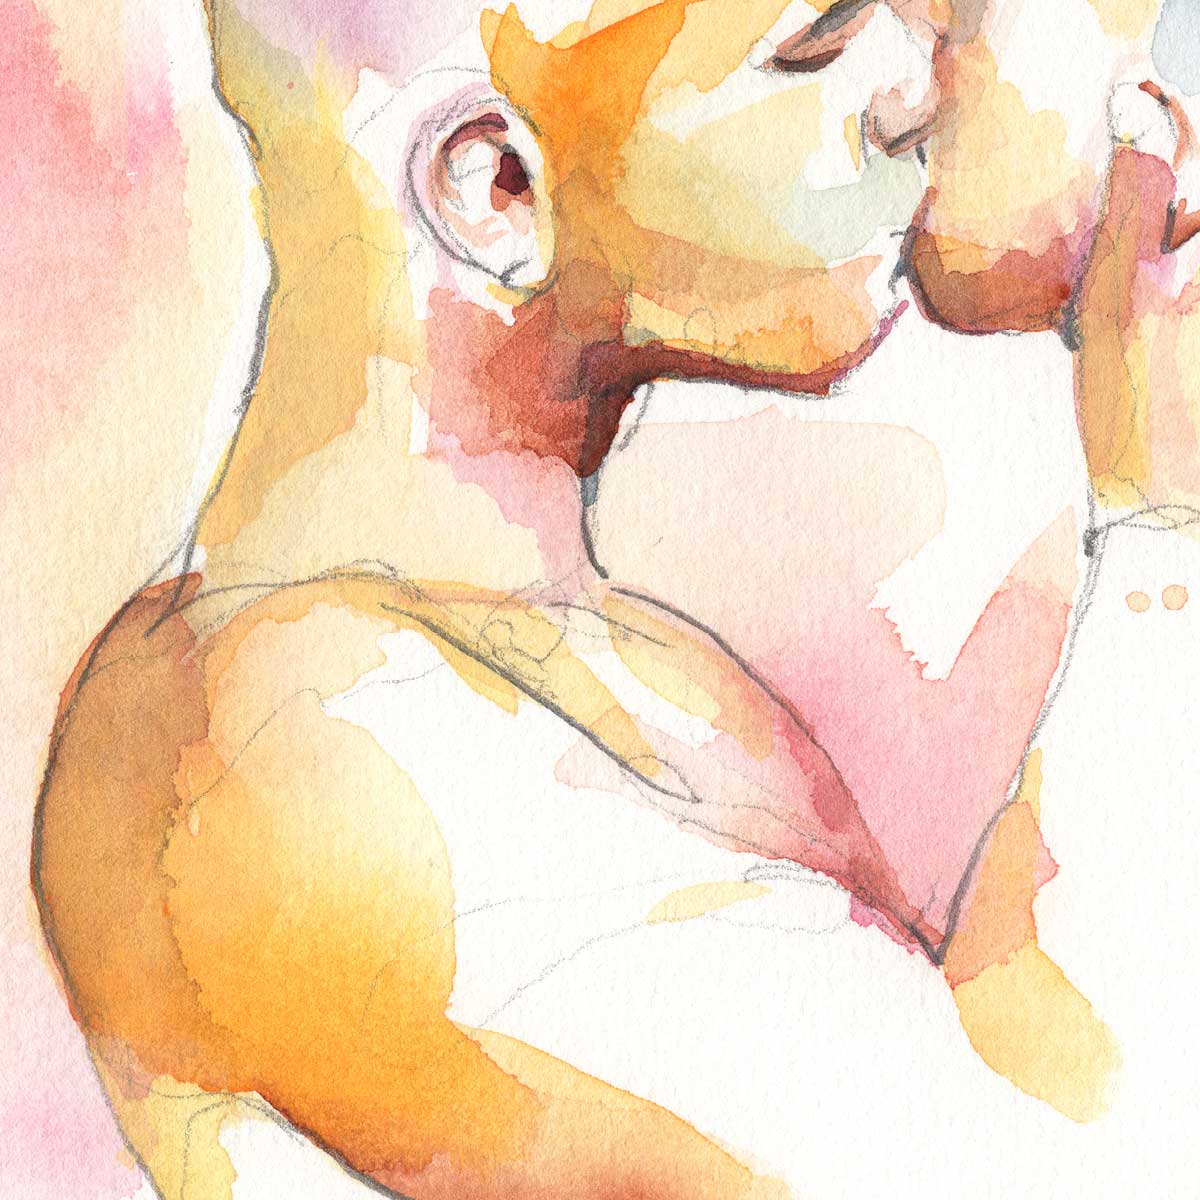 The Strength of Our Love - Kiss - Original Watercolor Painting